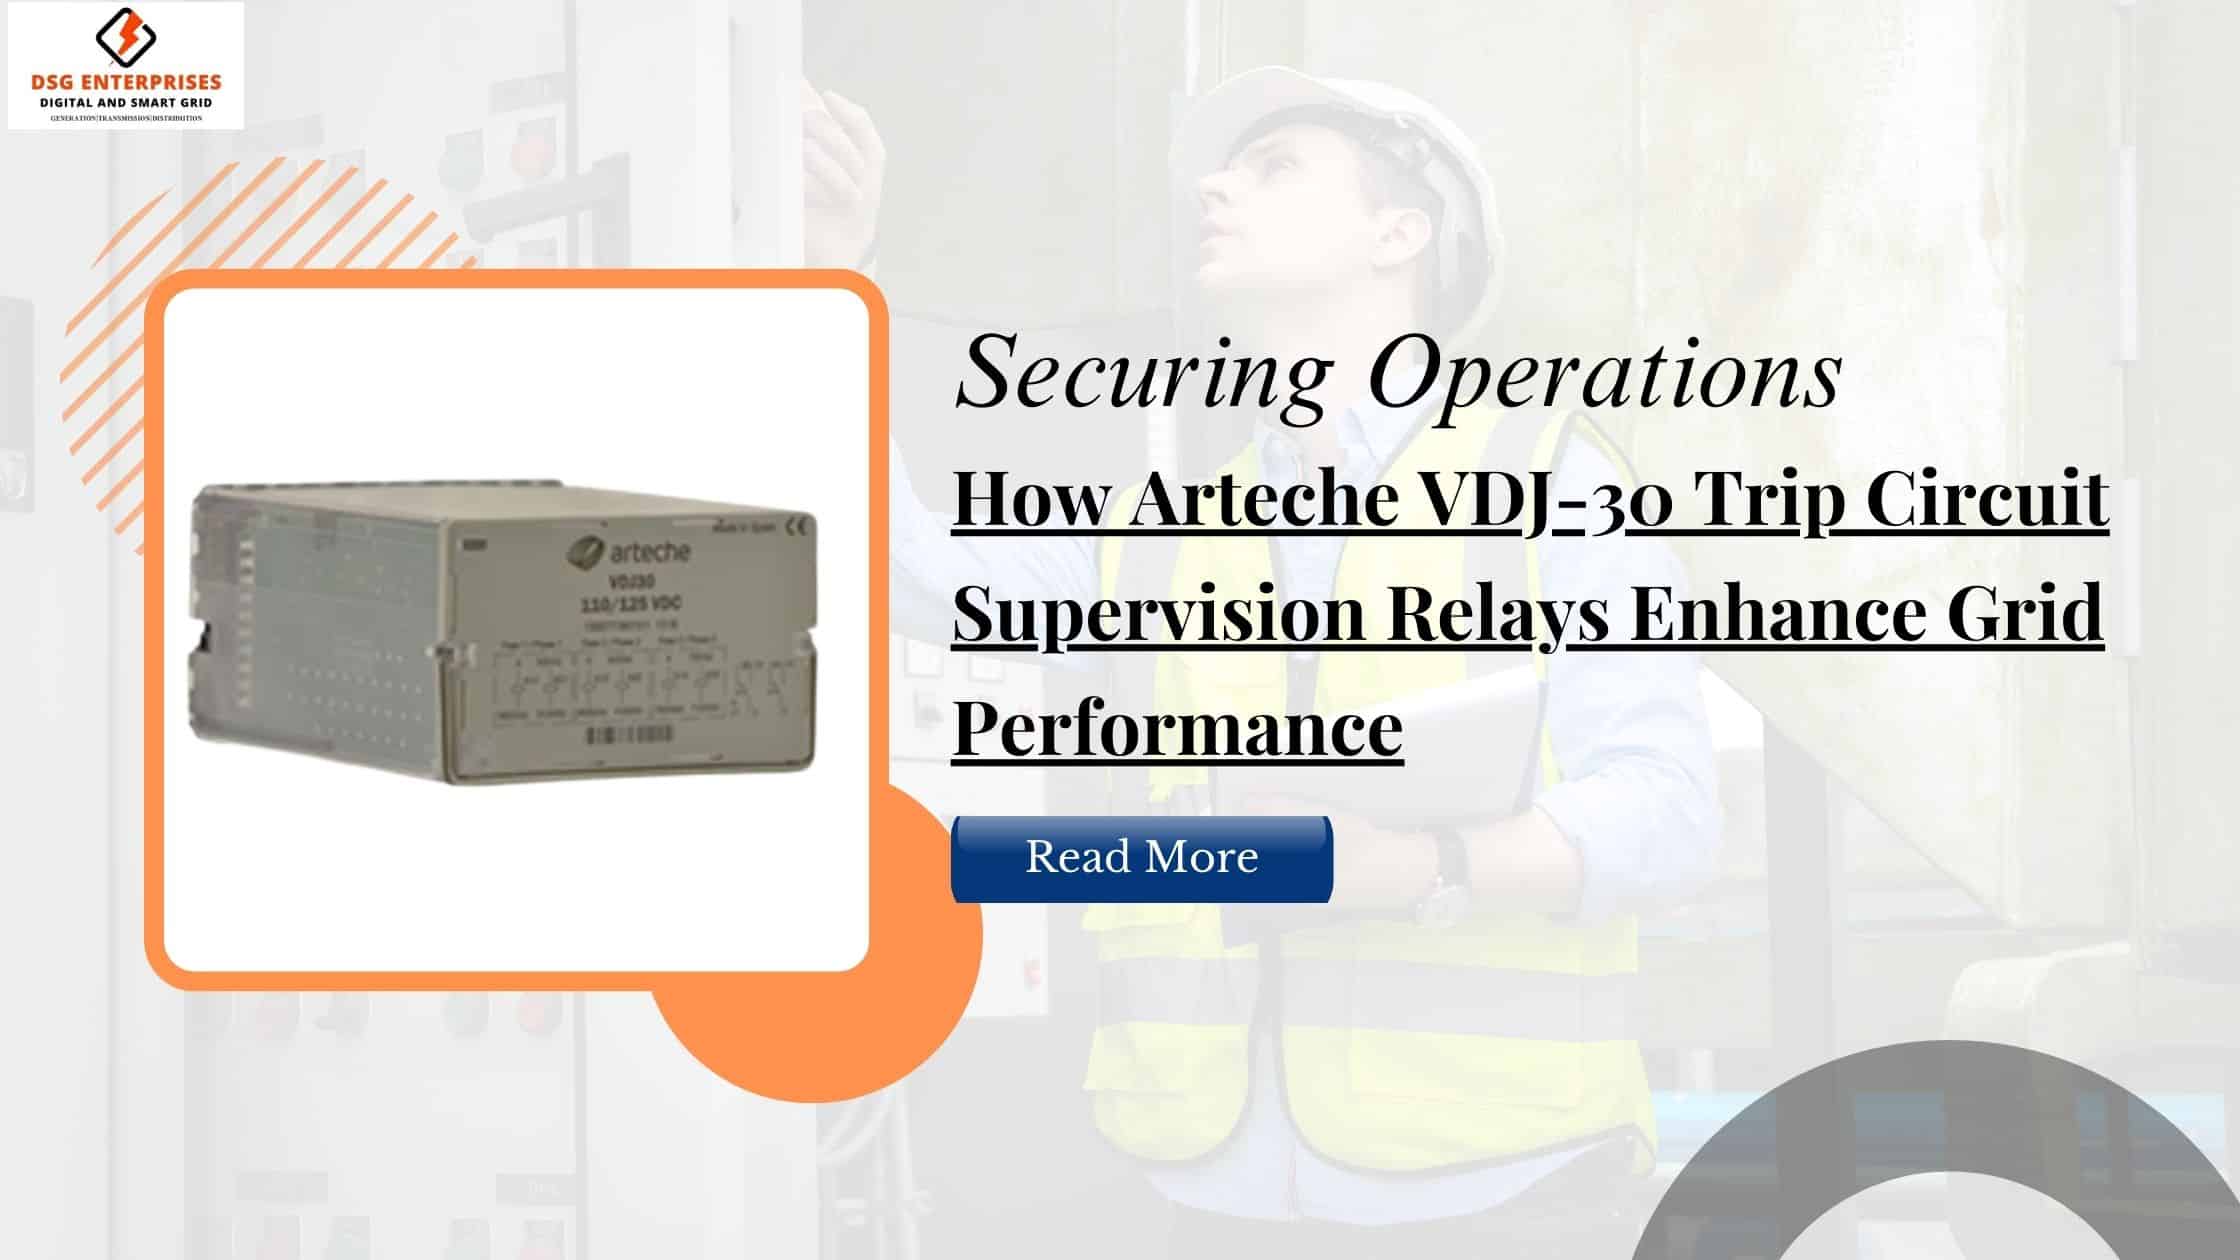 You are currently viewing Securing Operations: How Arteche VDJ-30 Trip Circuit Supervision Relays Enhance Grid Performance